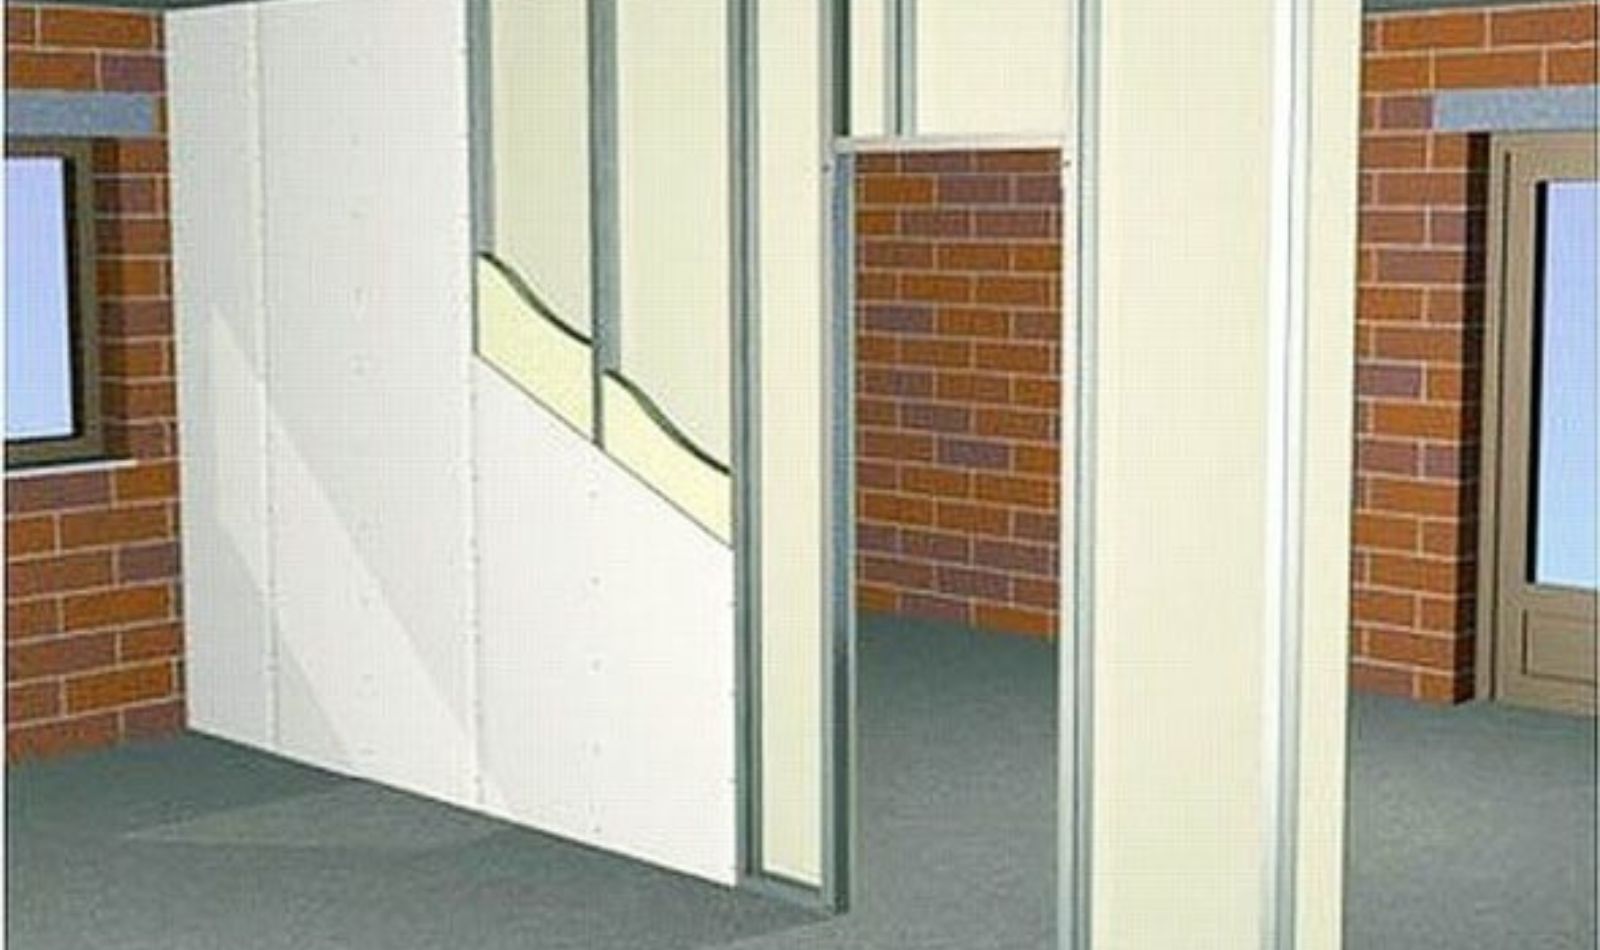 Dry-wall partition